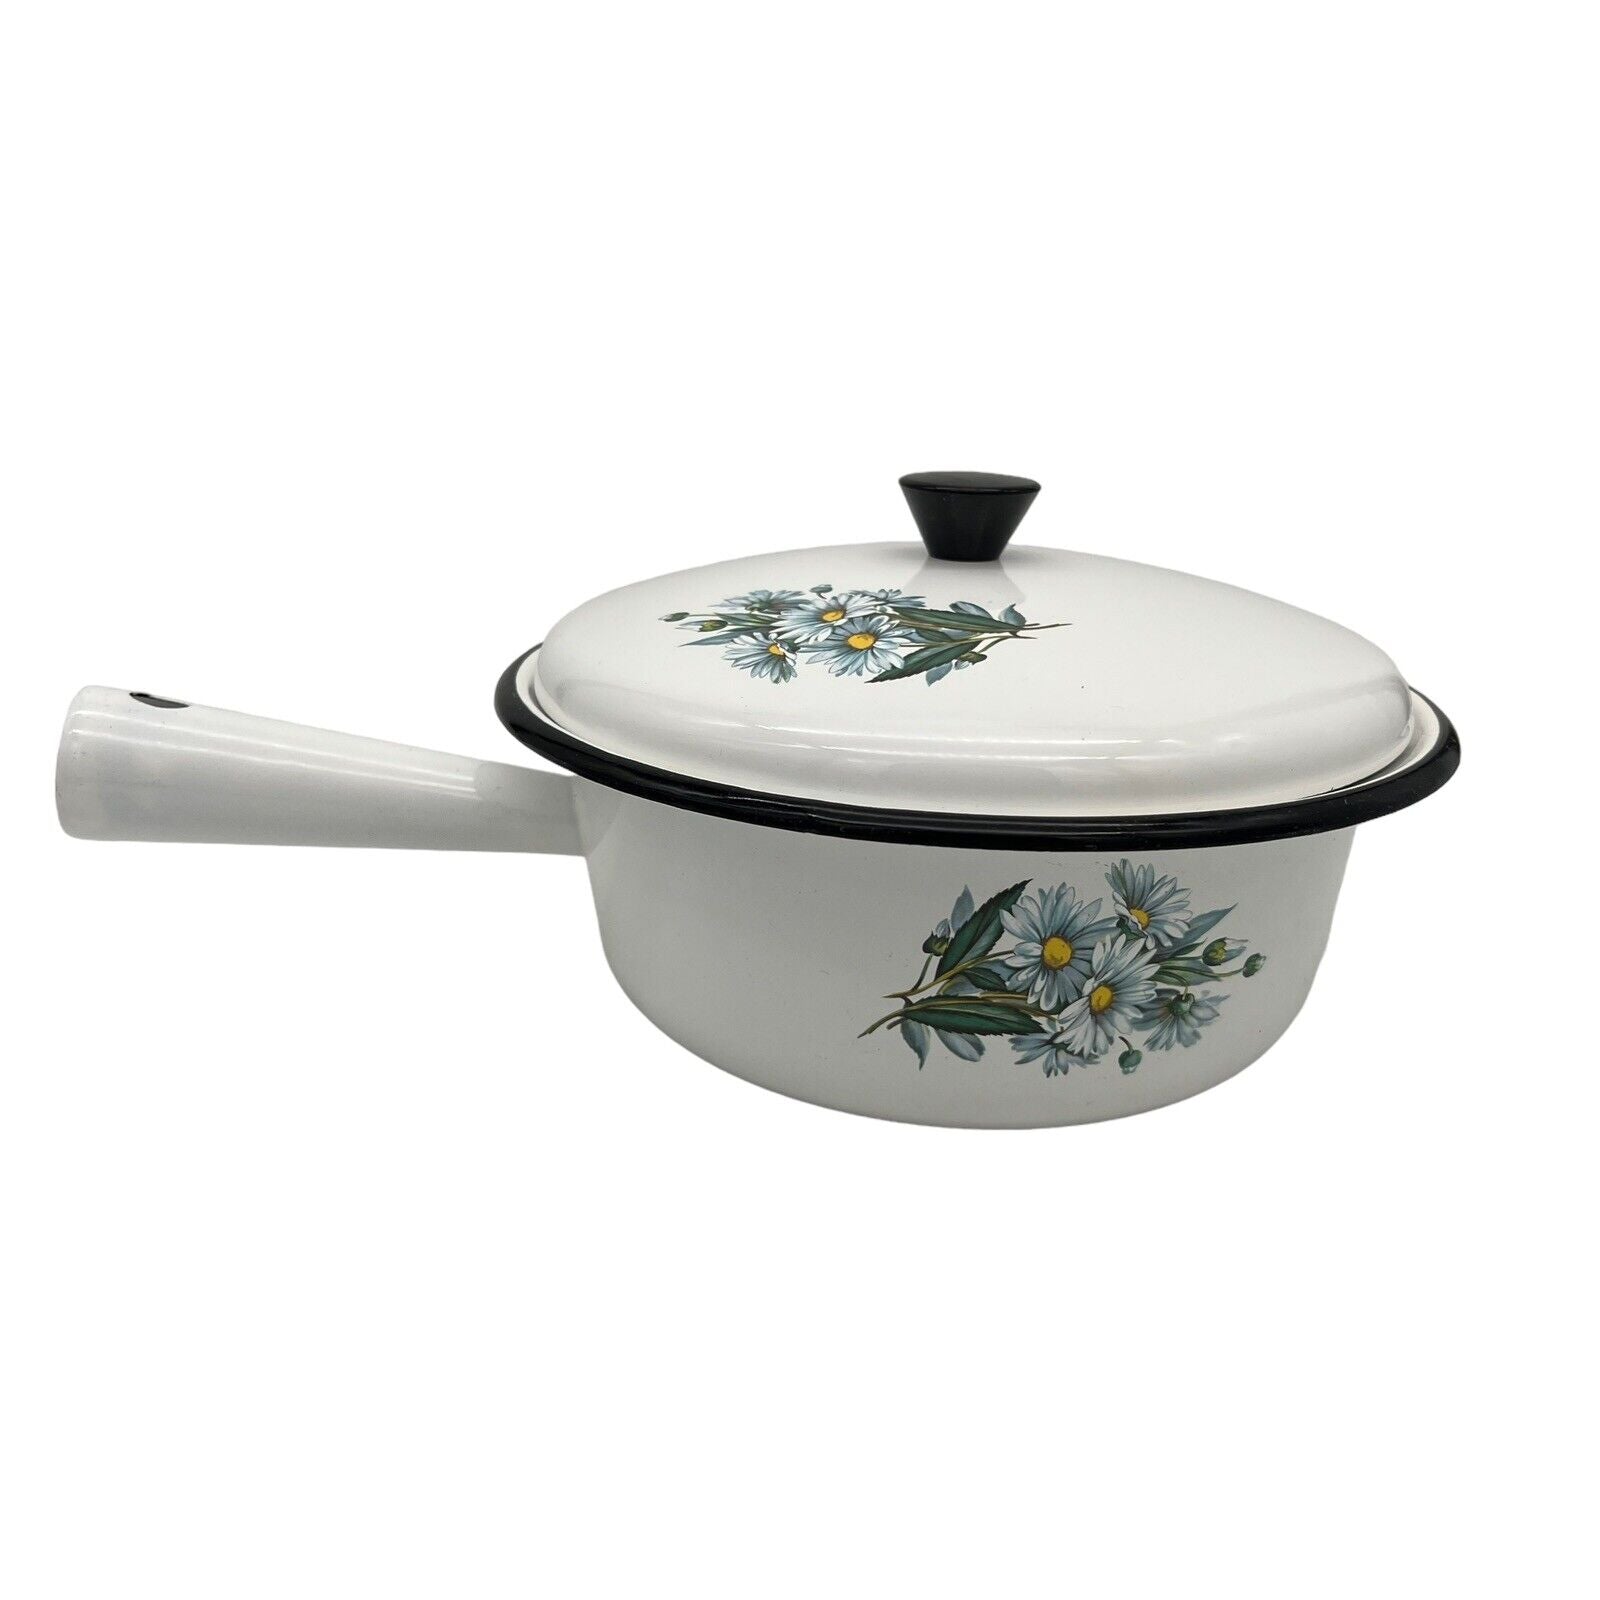 French vintage enamel saucepan with lid sold by All Things French Store 